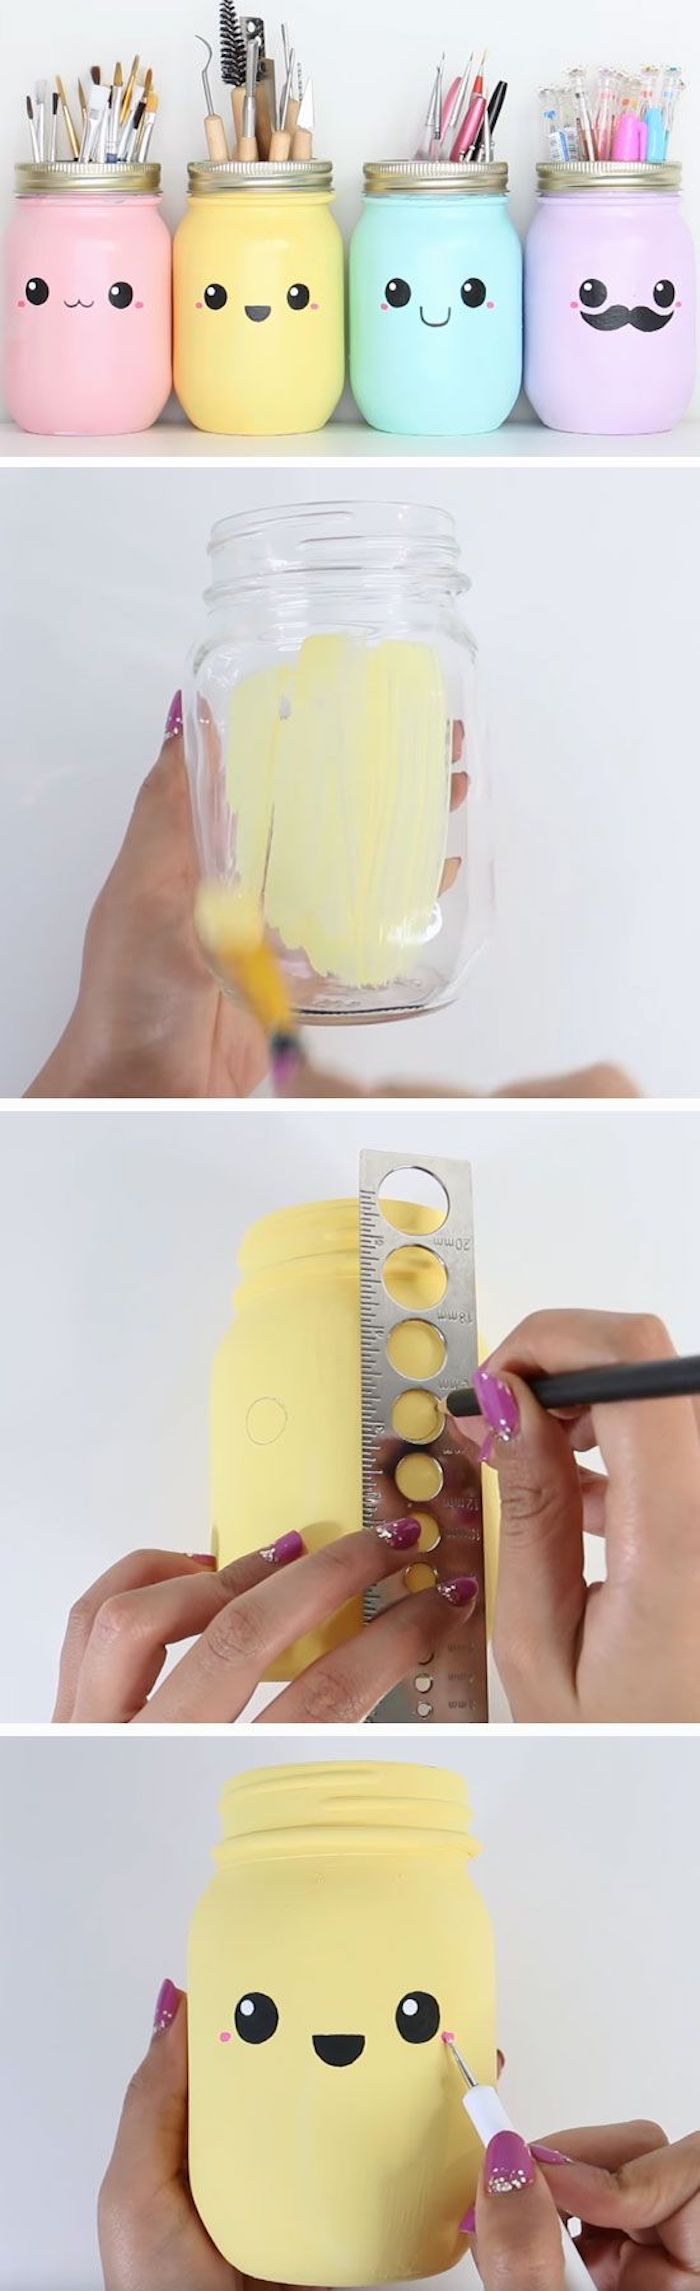 mason jars, painted in yellow and pink, purple and blue, things to do when bored for kids, step by step tutorial